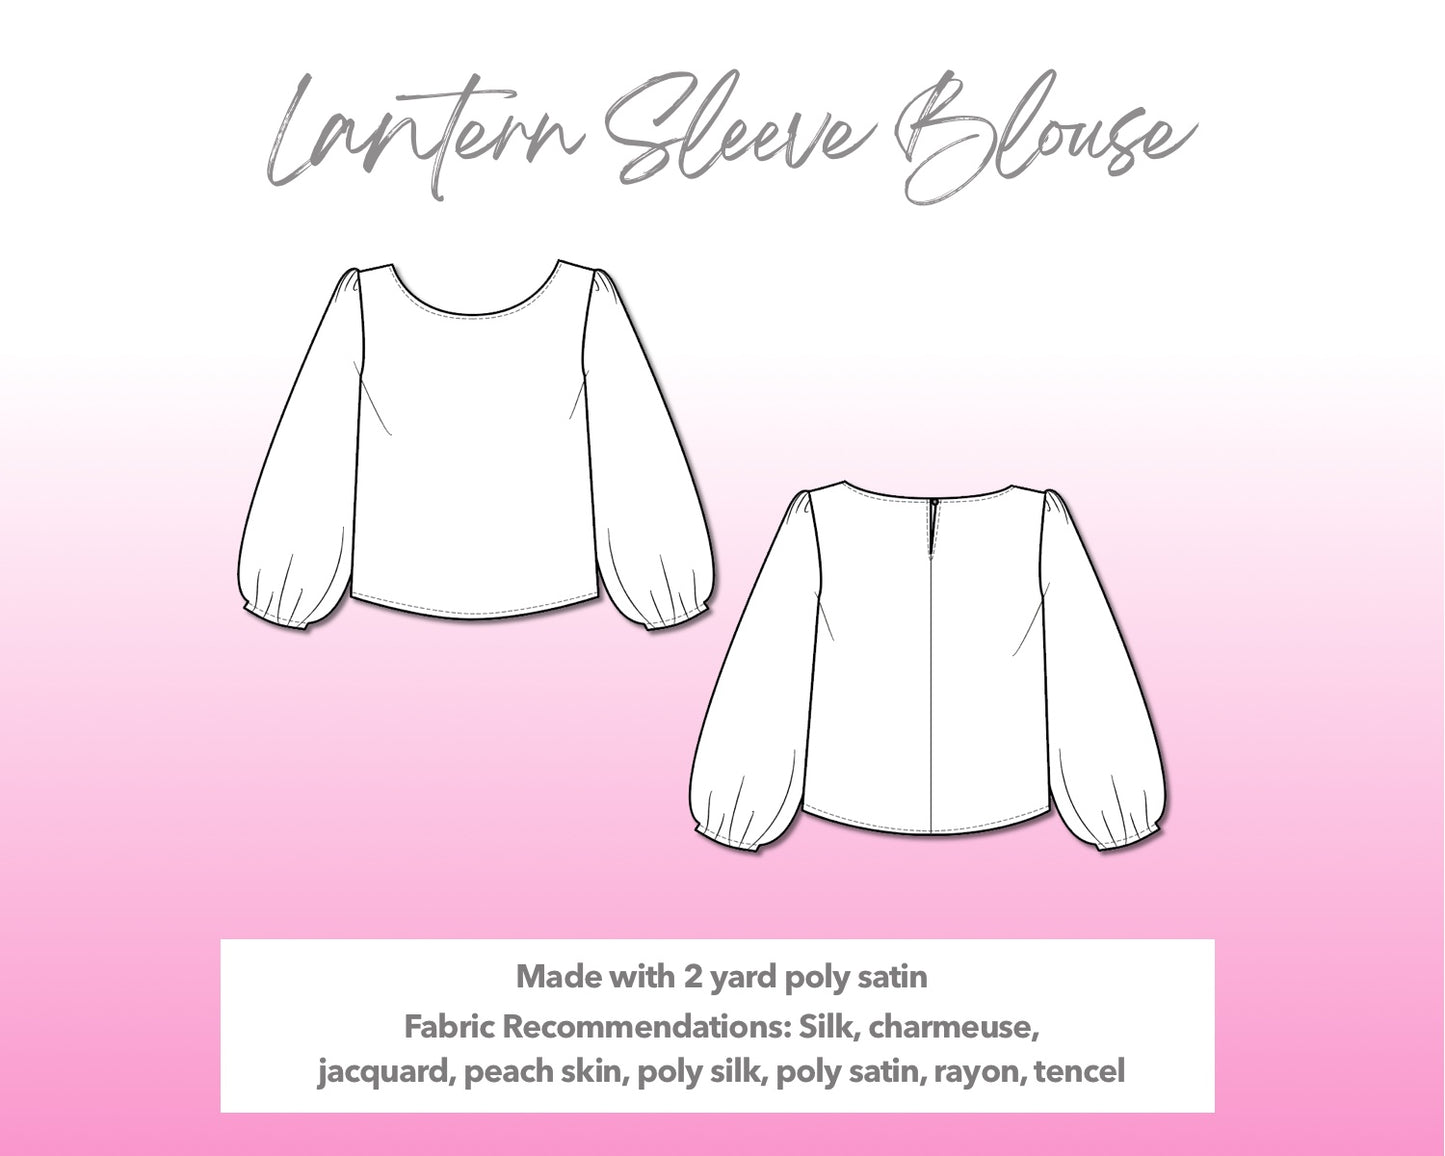 Illustration and detailed description for Lantern Sleeve Blouse sewing pattern.